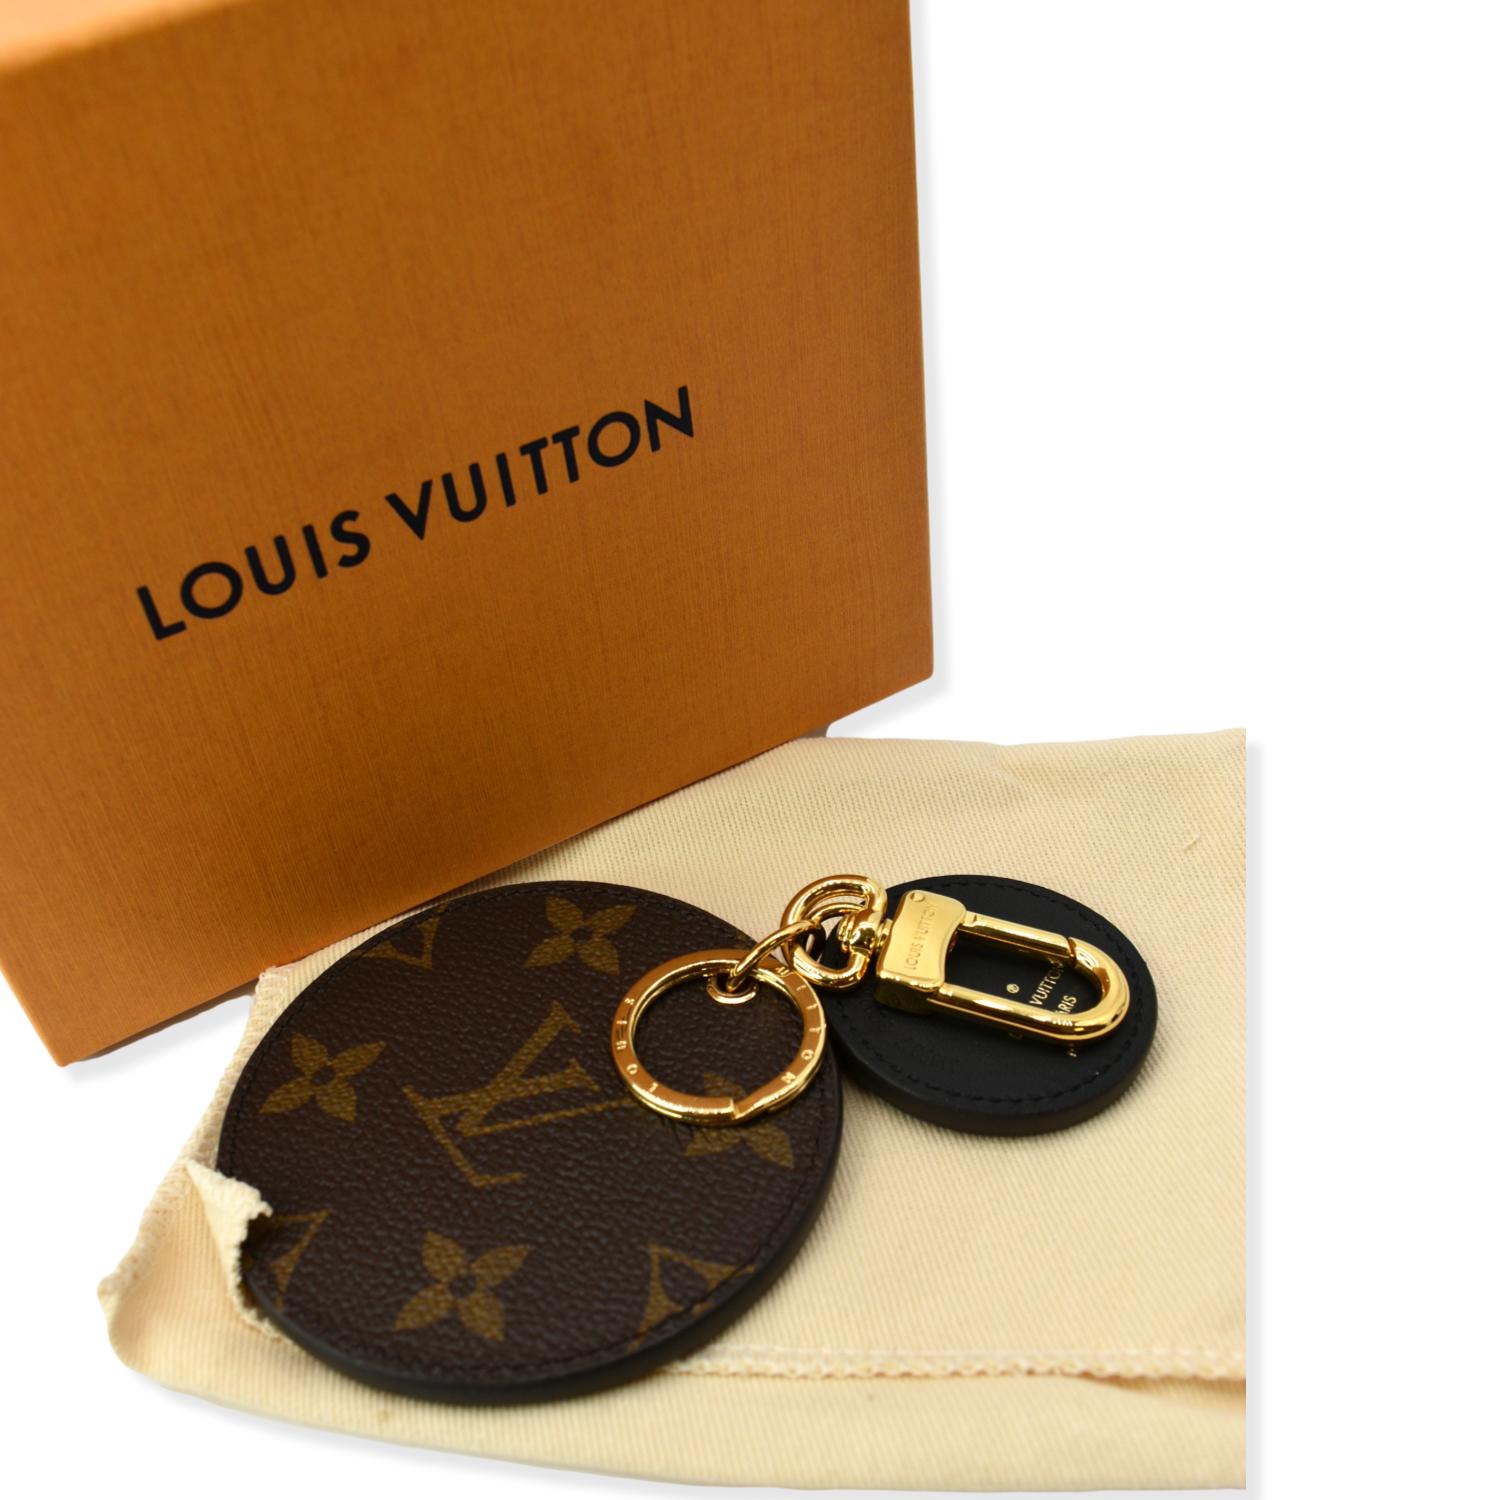 Monogram Reverse Key Holder and Bag Charm LV Louis Vuitton review box  opening 